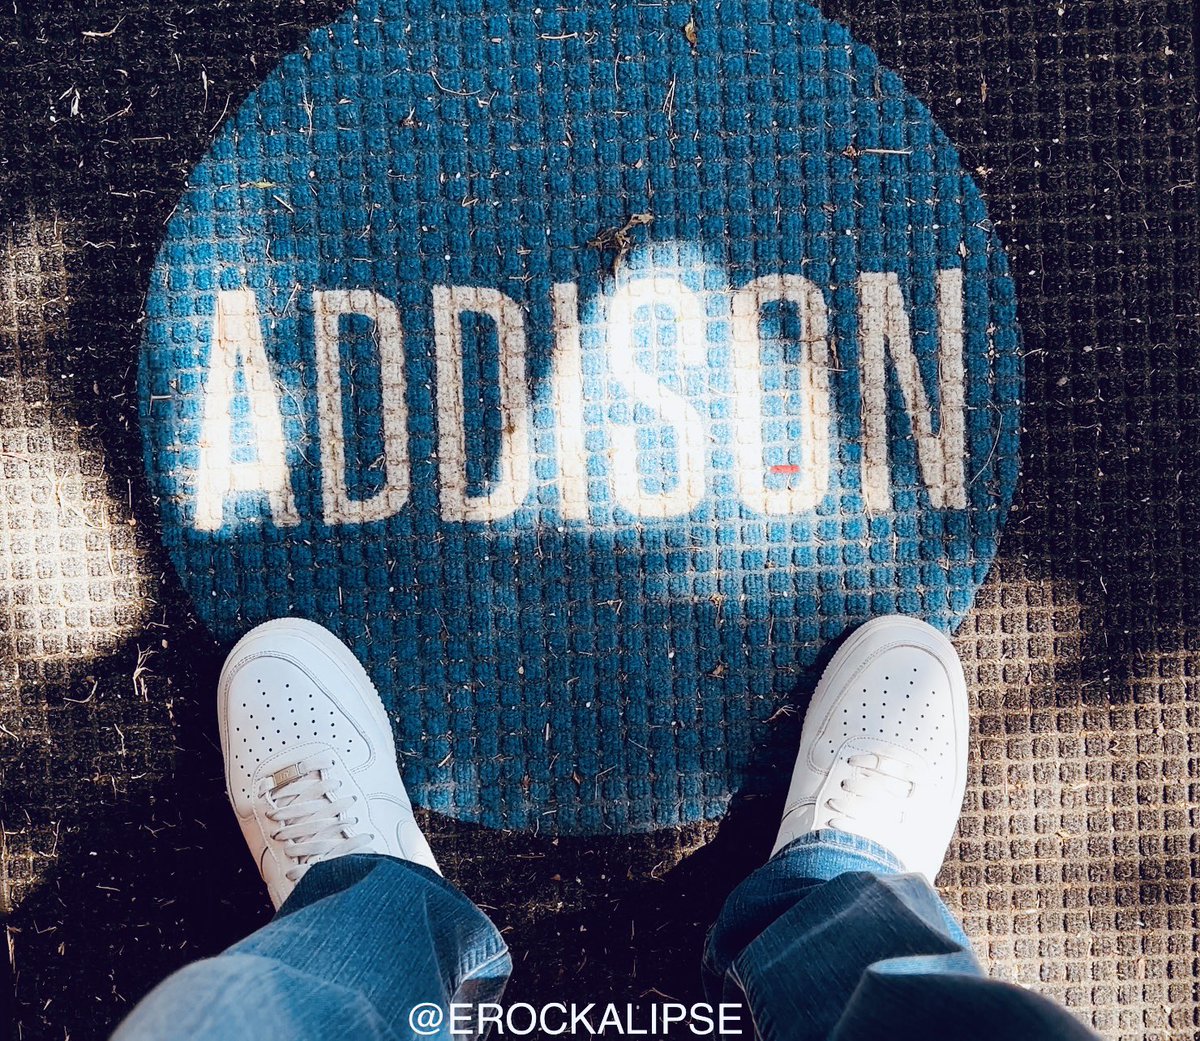 OUT HERE #WINNING #ADDISON #Fromwhereistand ⭐️⭐️⭐️⭐️⭐️